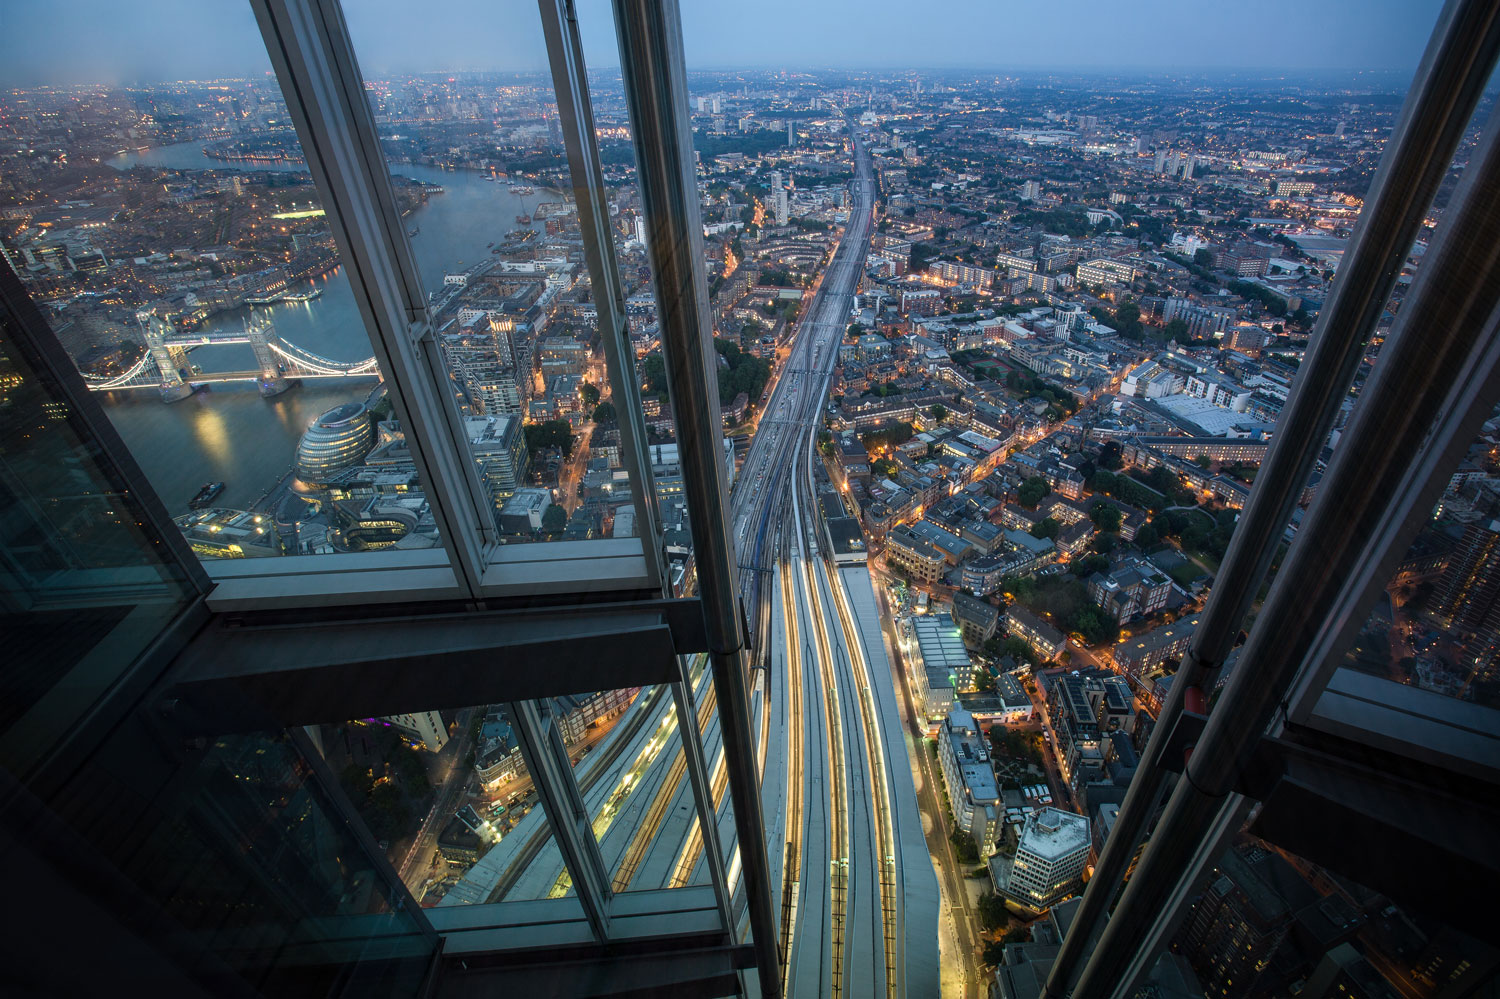 Local area photography - London Shard view